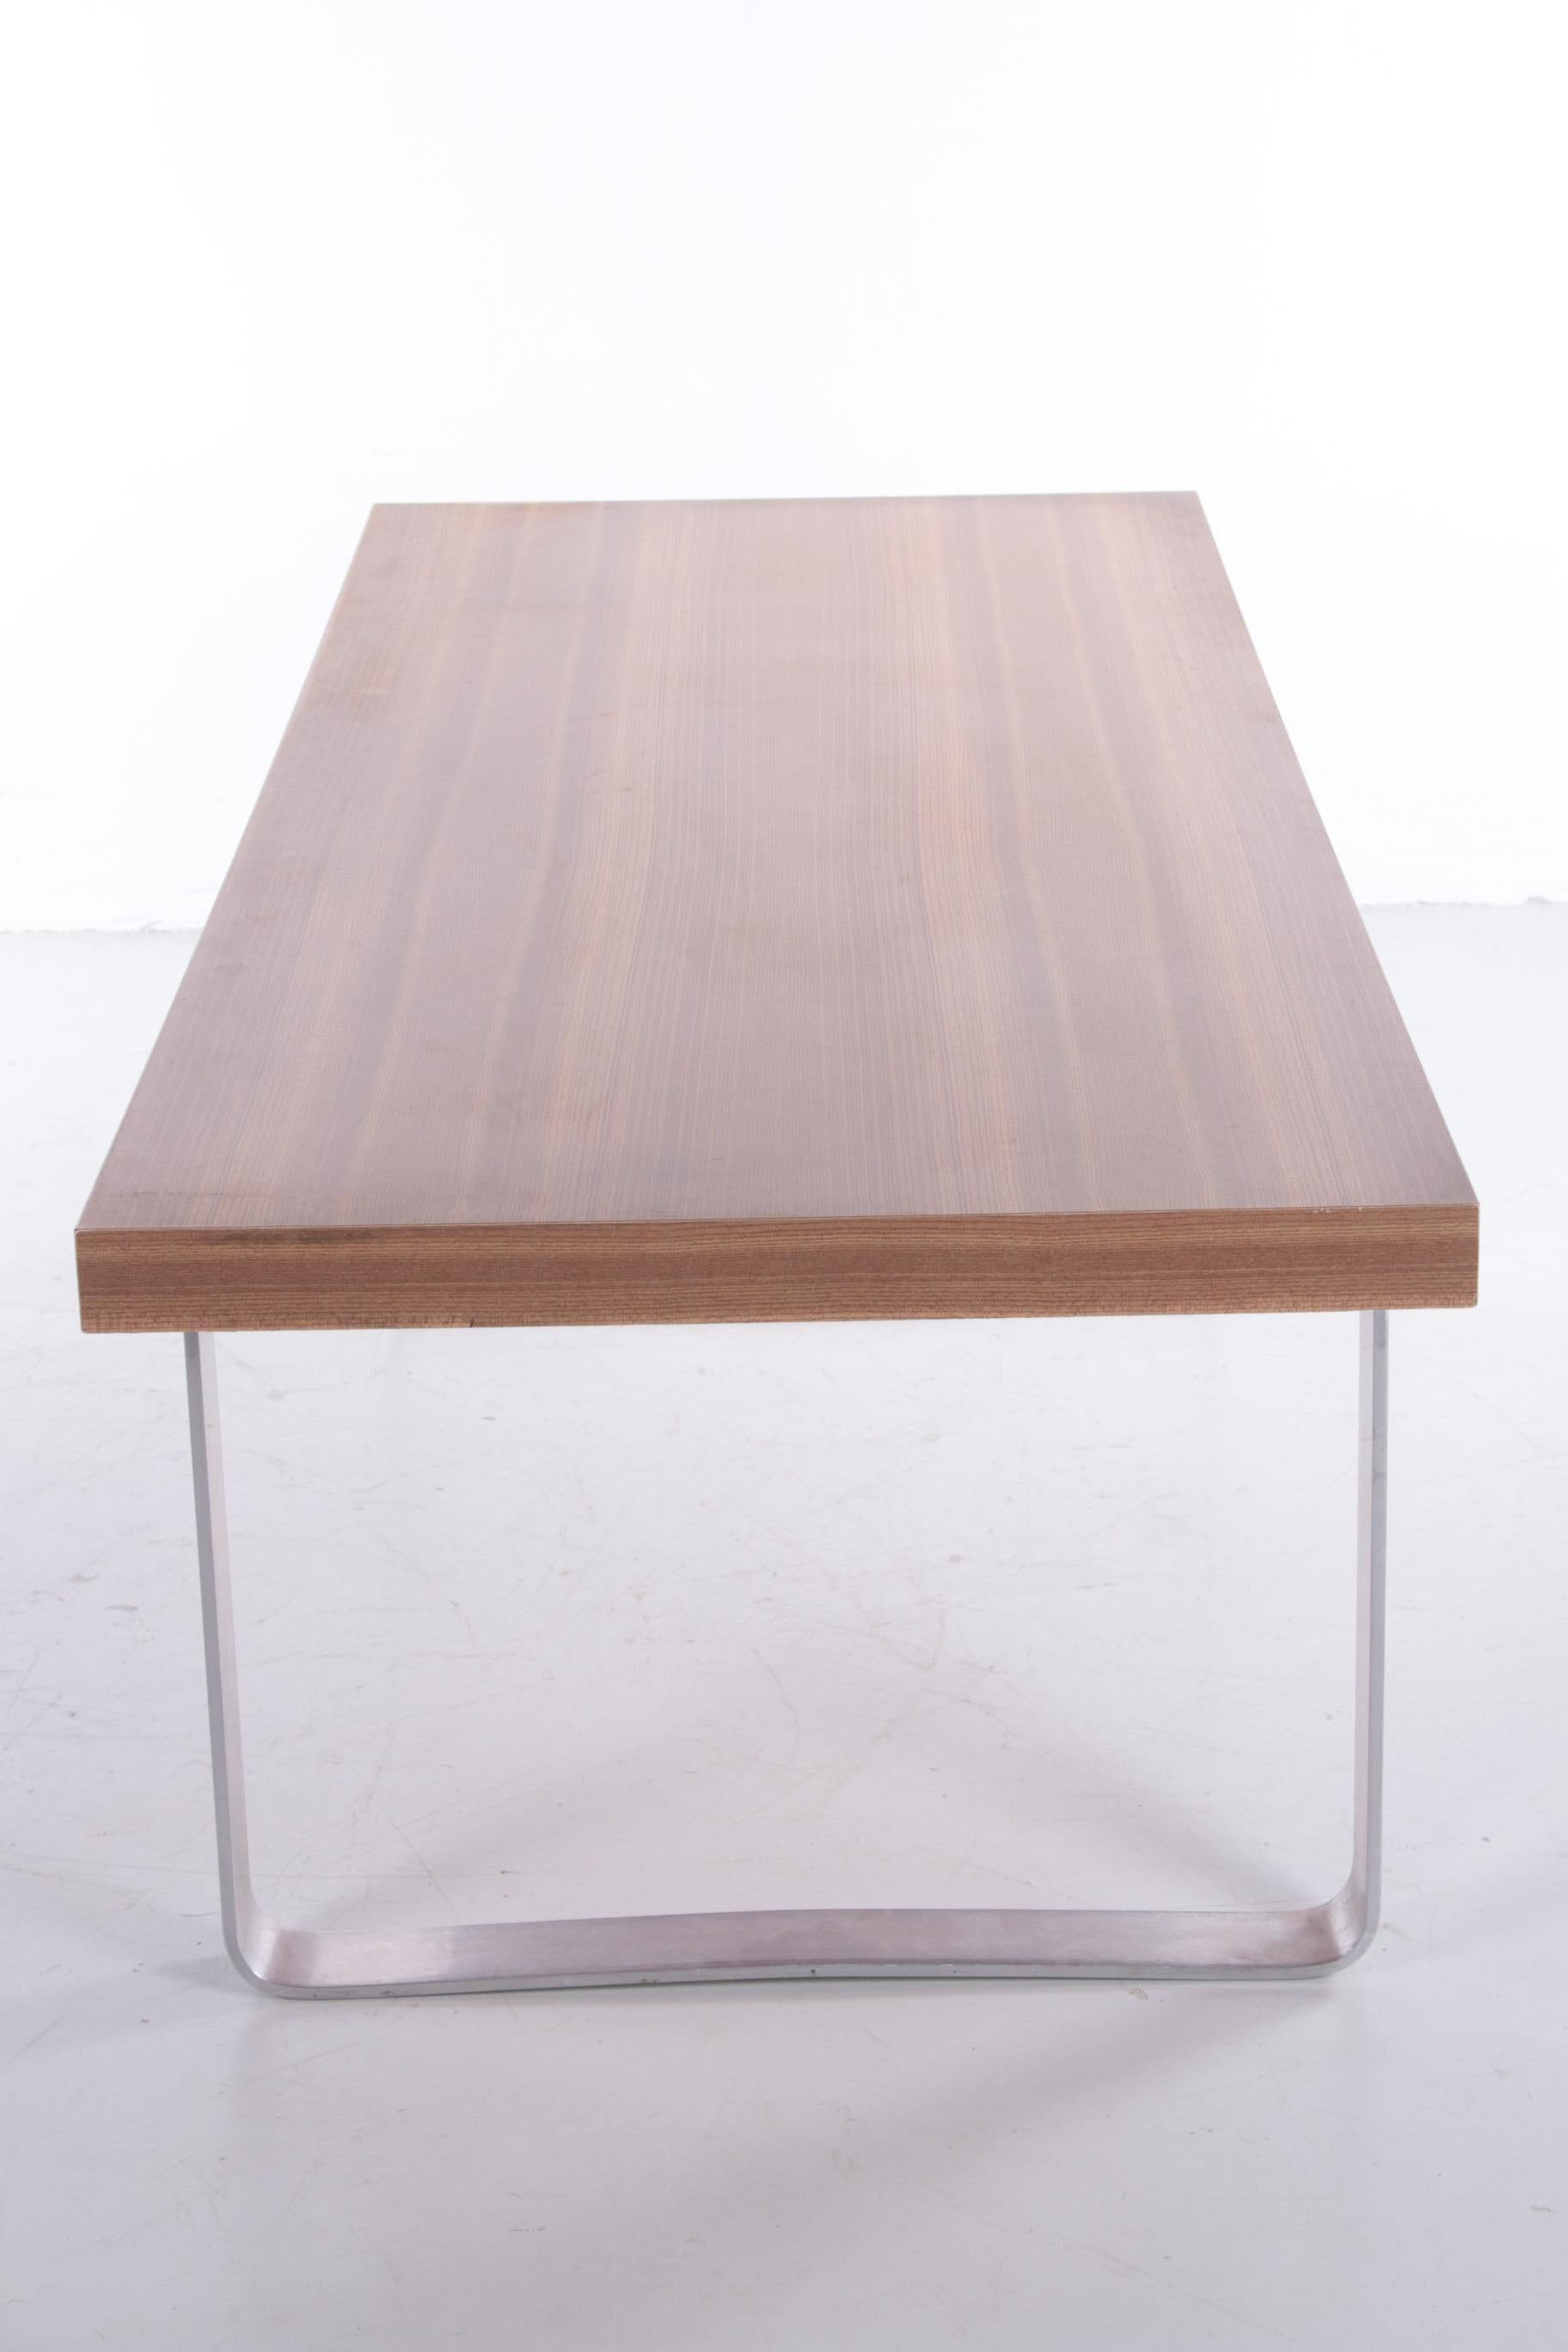 Vintage long Coffee Table Wood and Chrome, 1970s For Sale 4